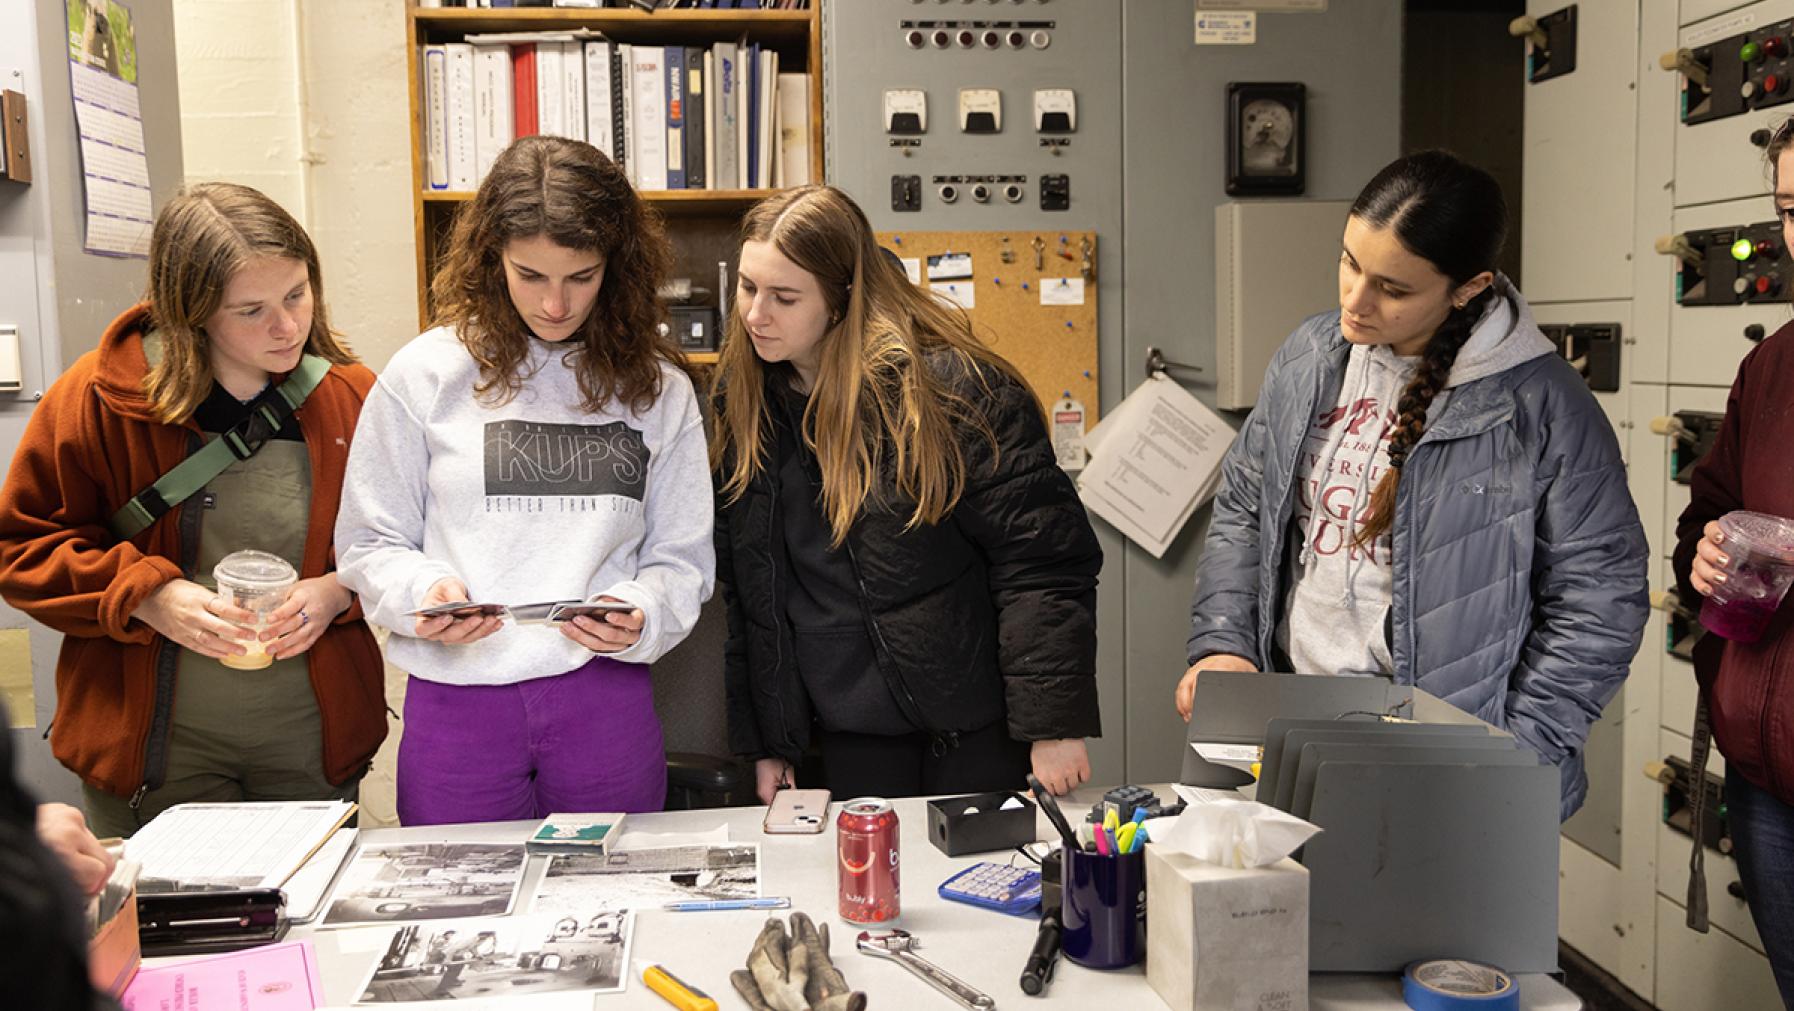 Students looking at prison archives ephemera